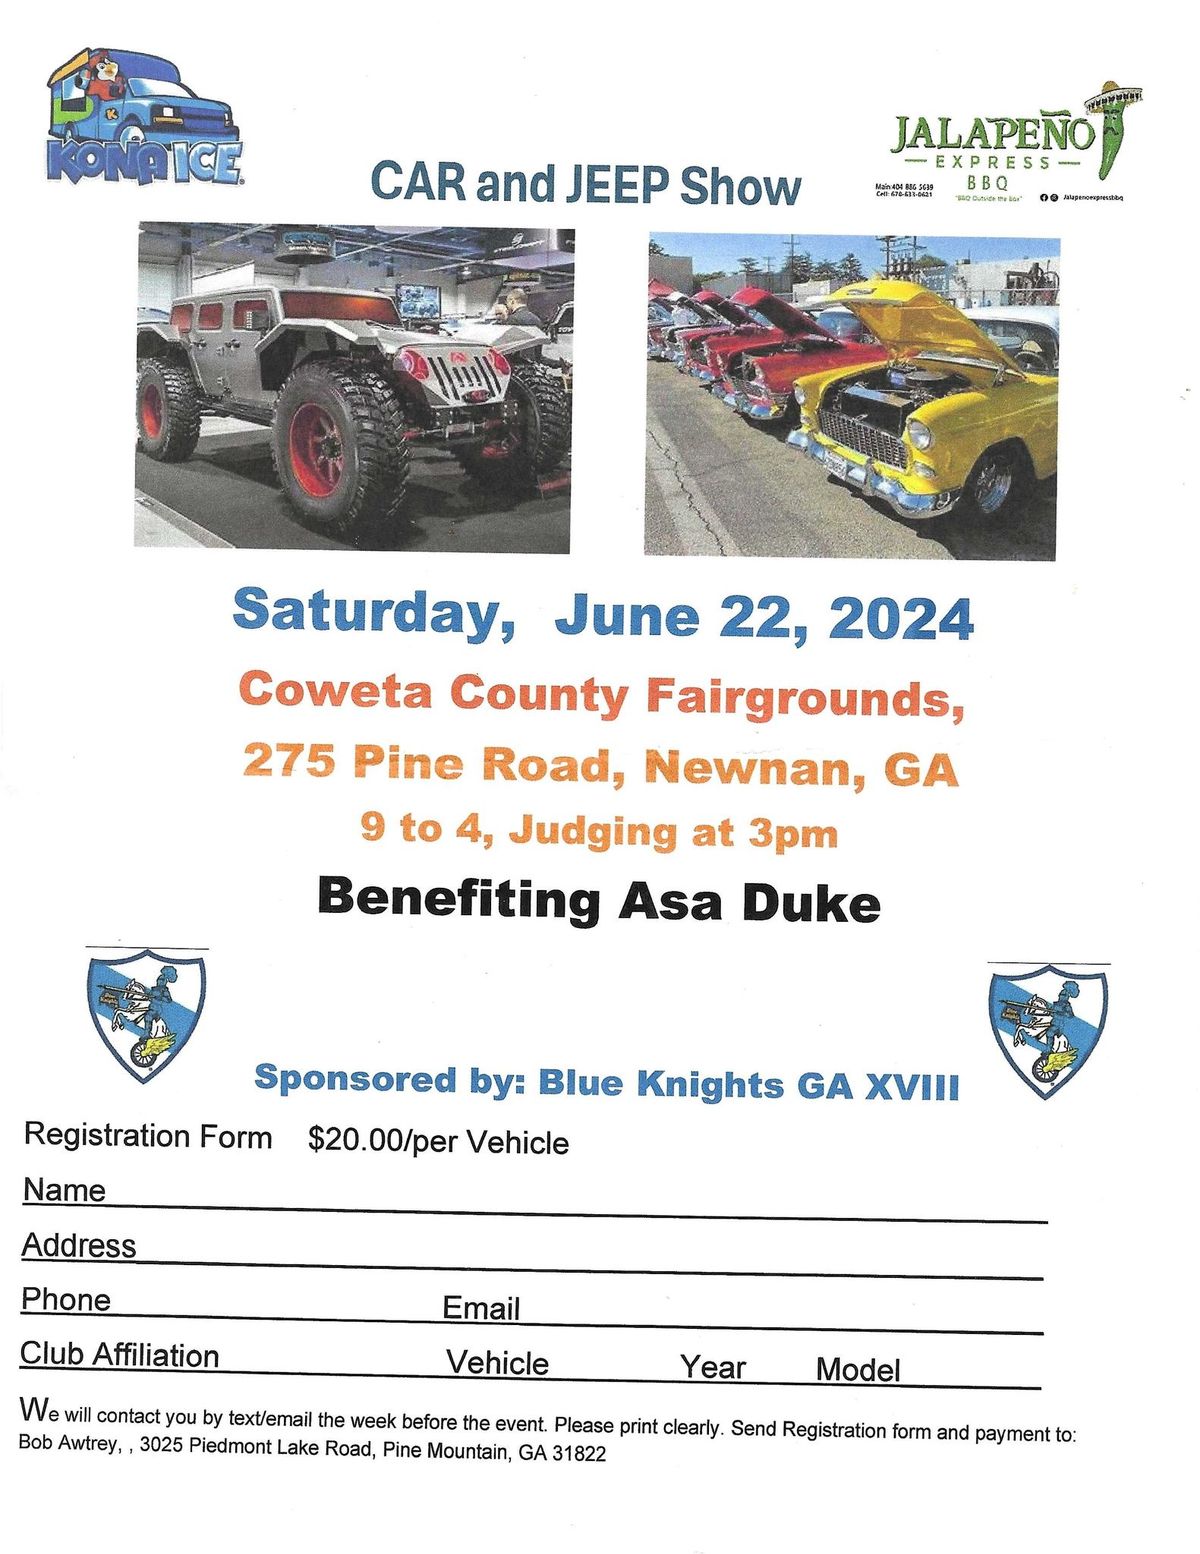 Car and Jeep Show Benefitting Asa Duke Hosted by Blue Knights Ga XVIII